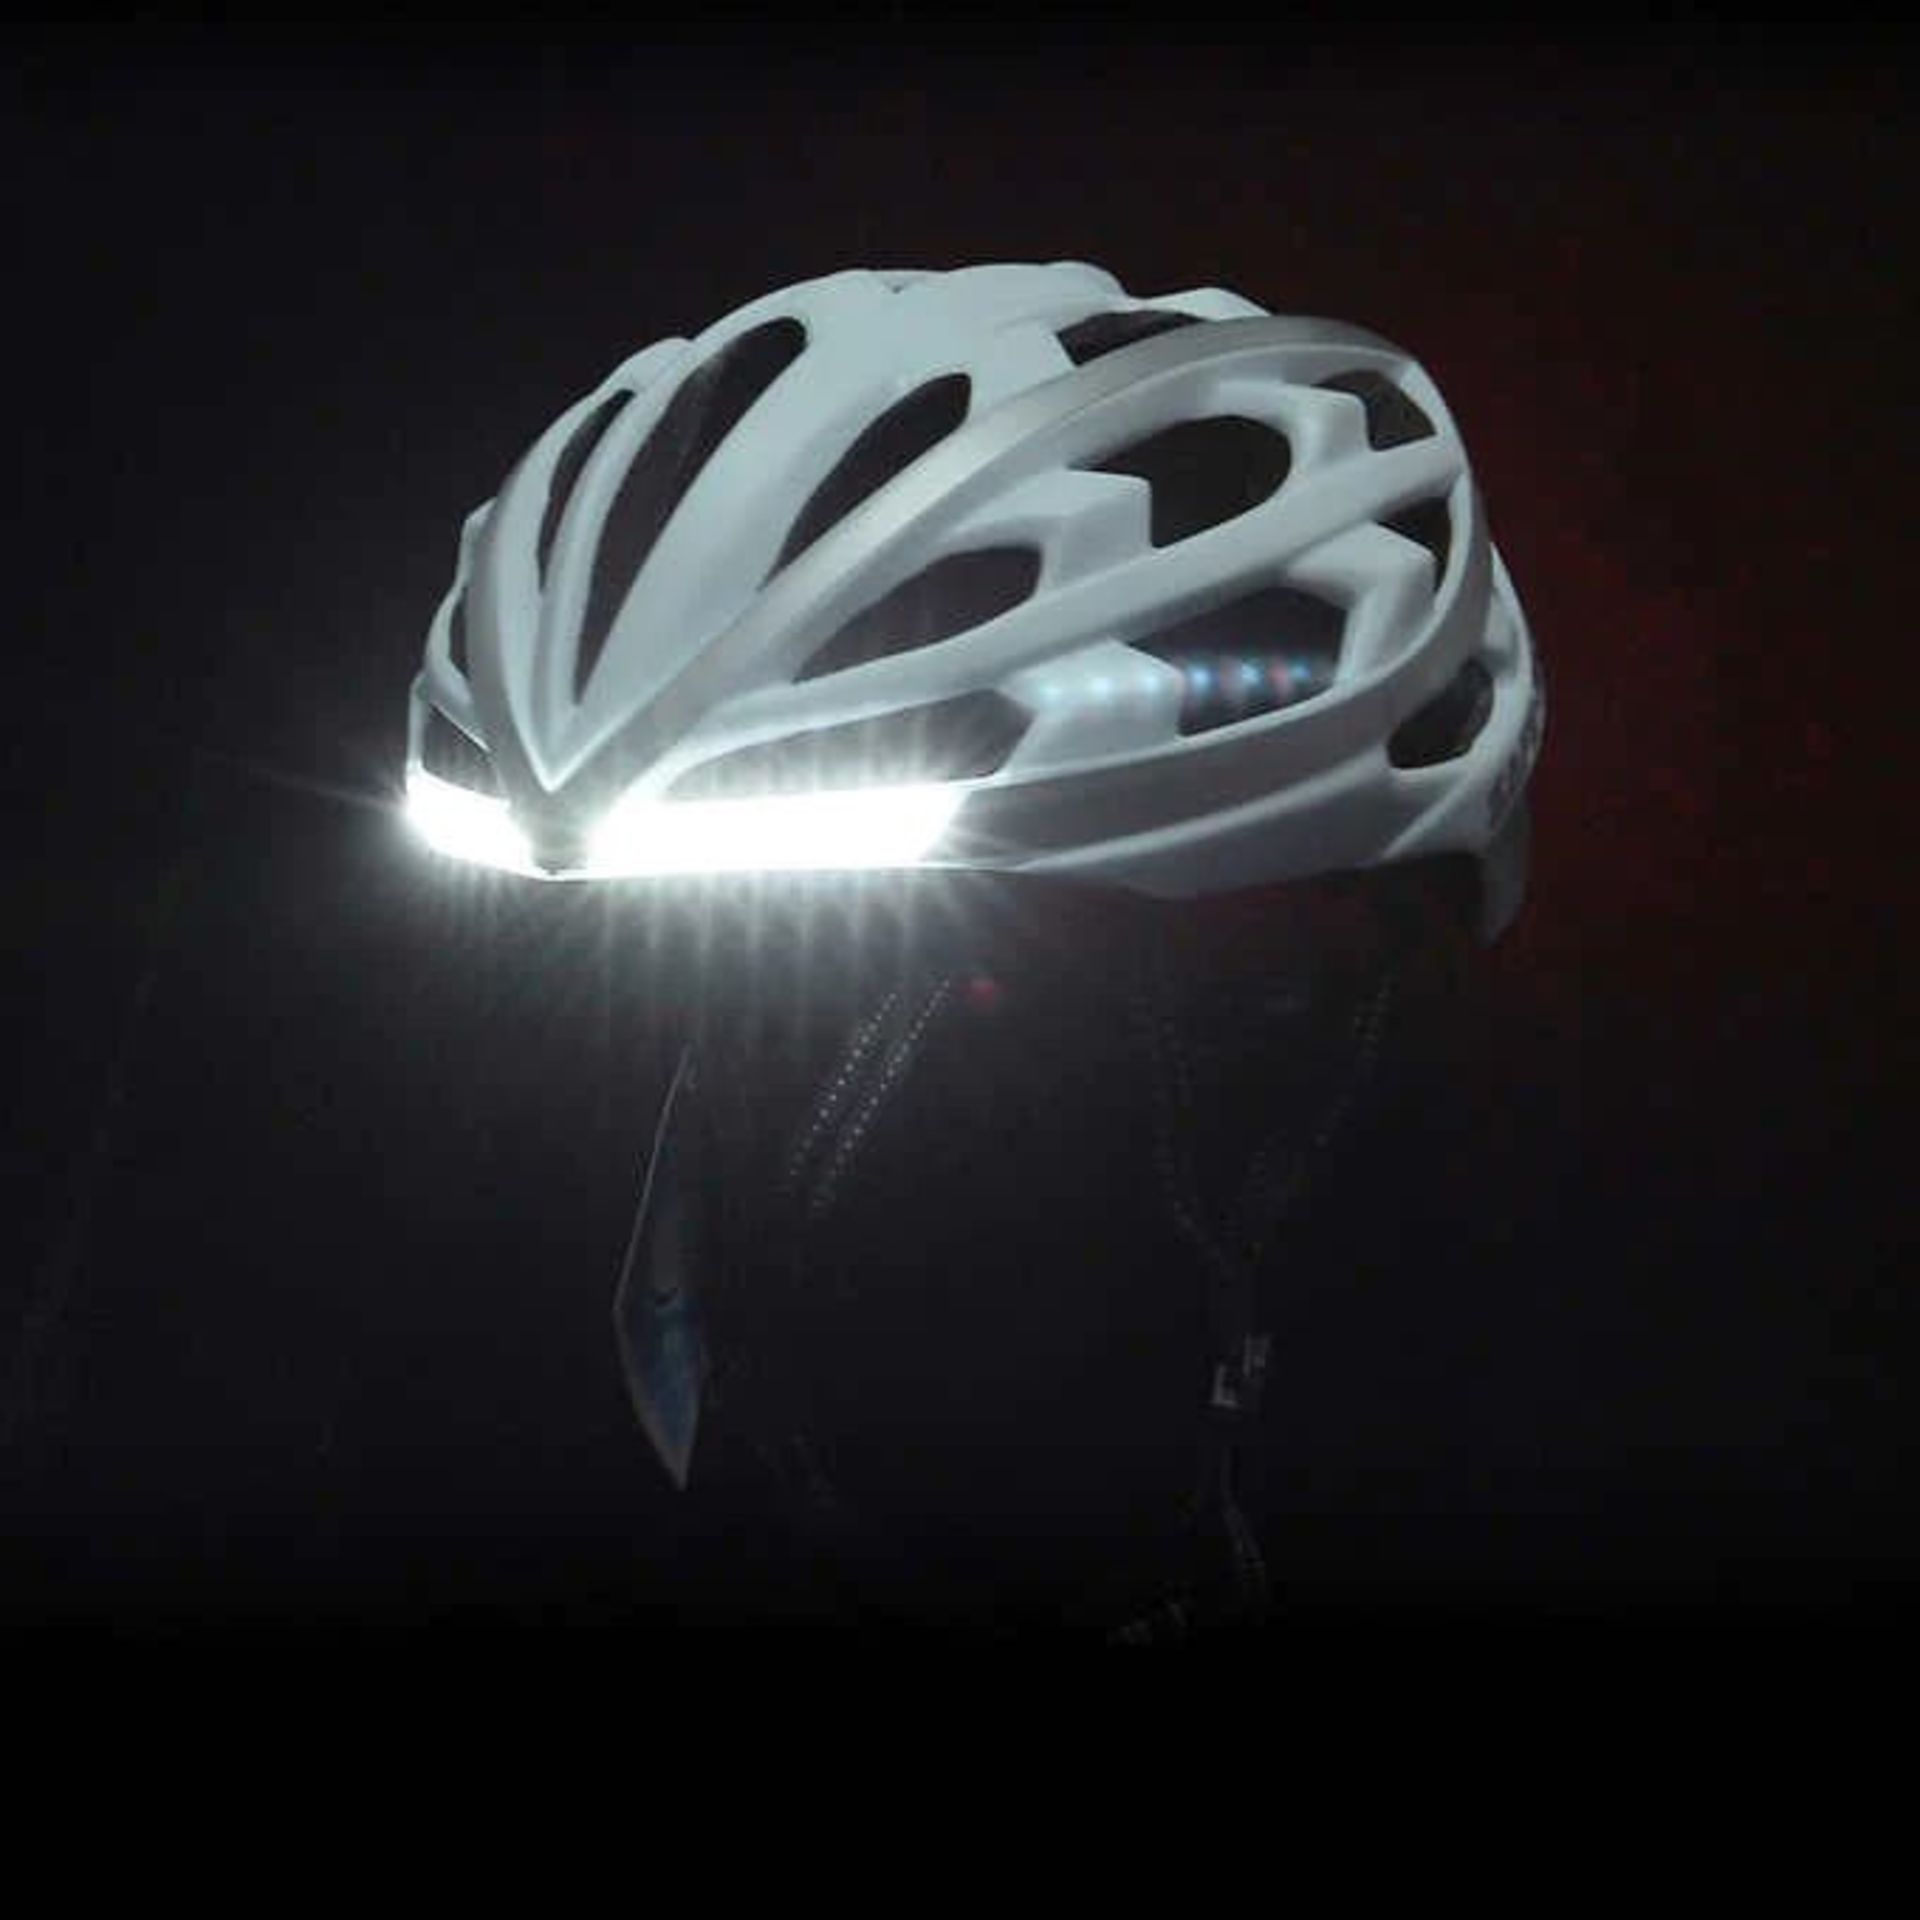 SAFE-TEC WHITE/SILVER BICYCLE HELMET (LARGE) C/W BLUETOOTH SPEAKERS & LIGHTS (NEW) (MSRP $150) - Image 7 of 8